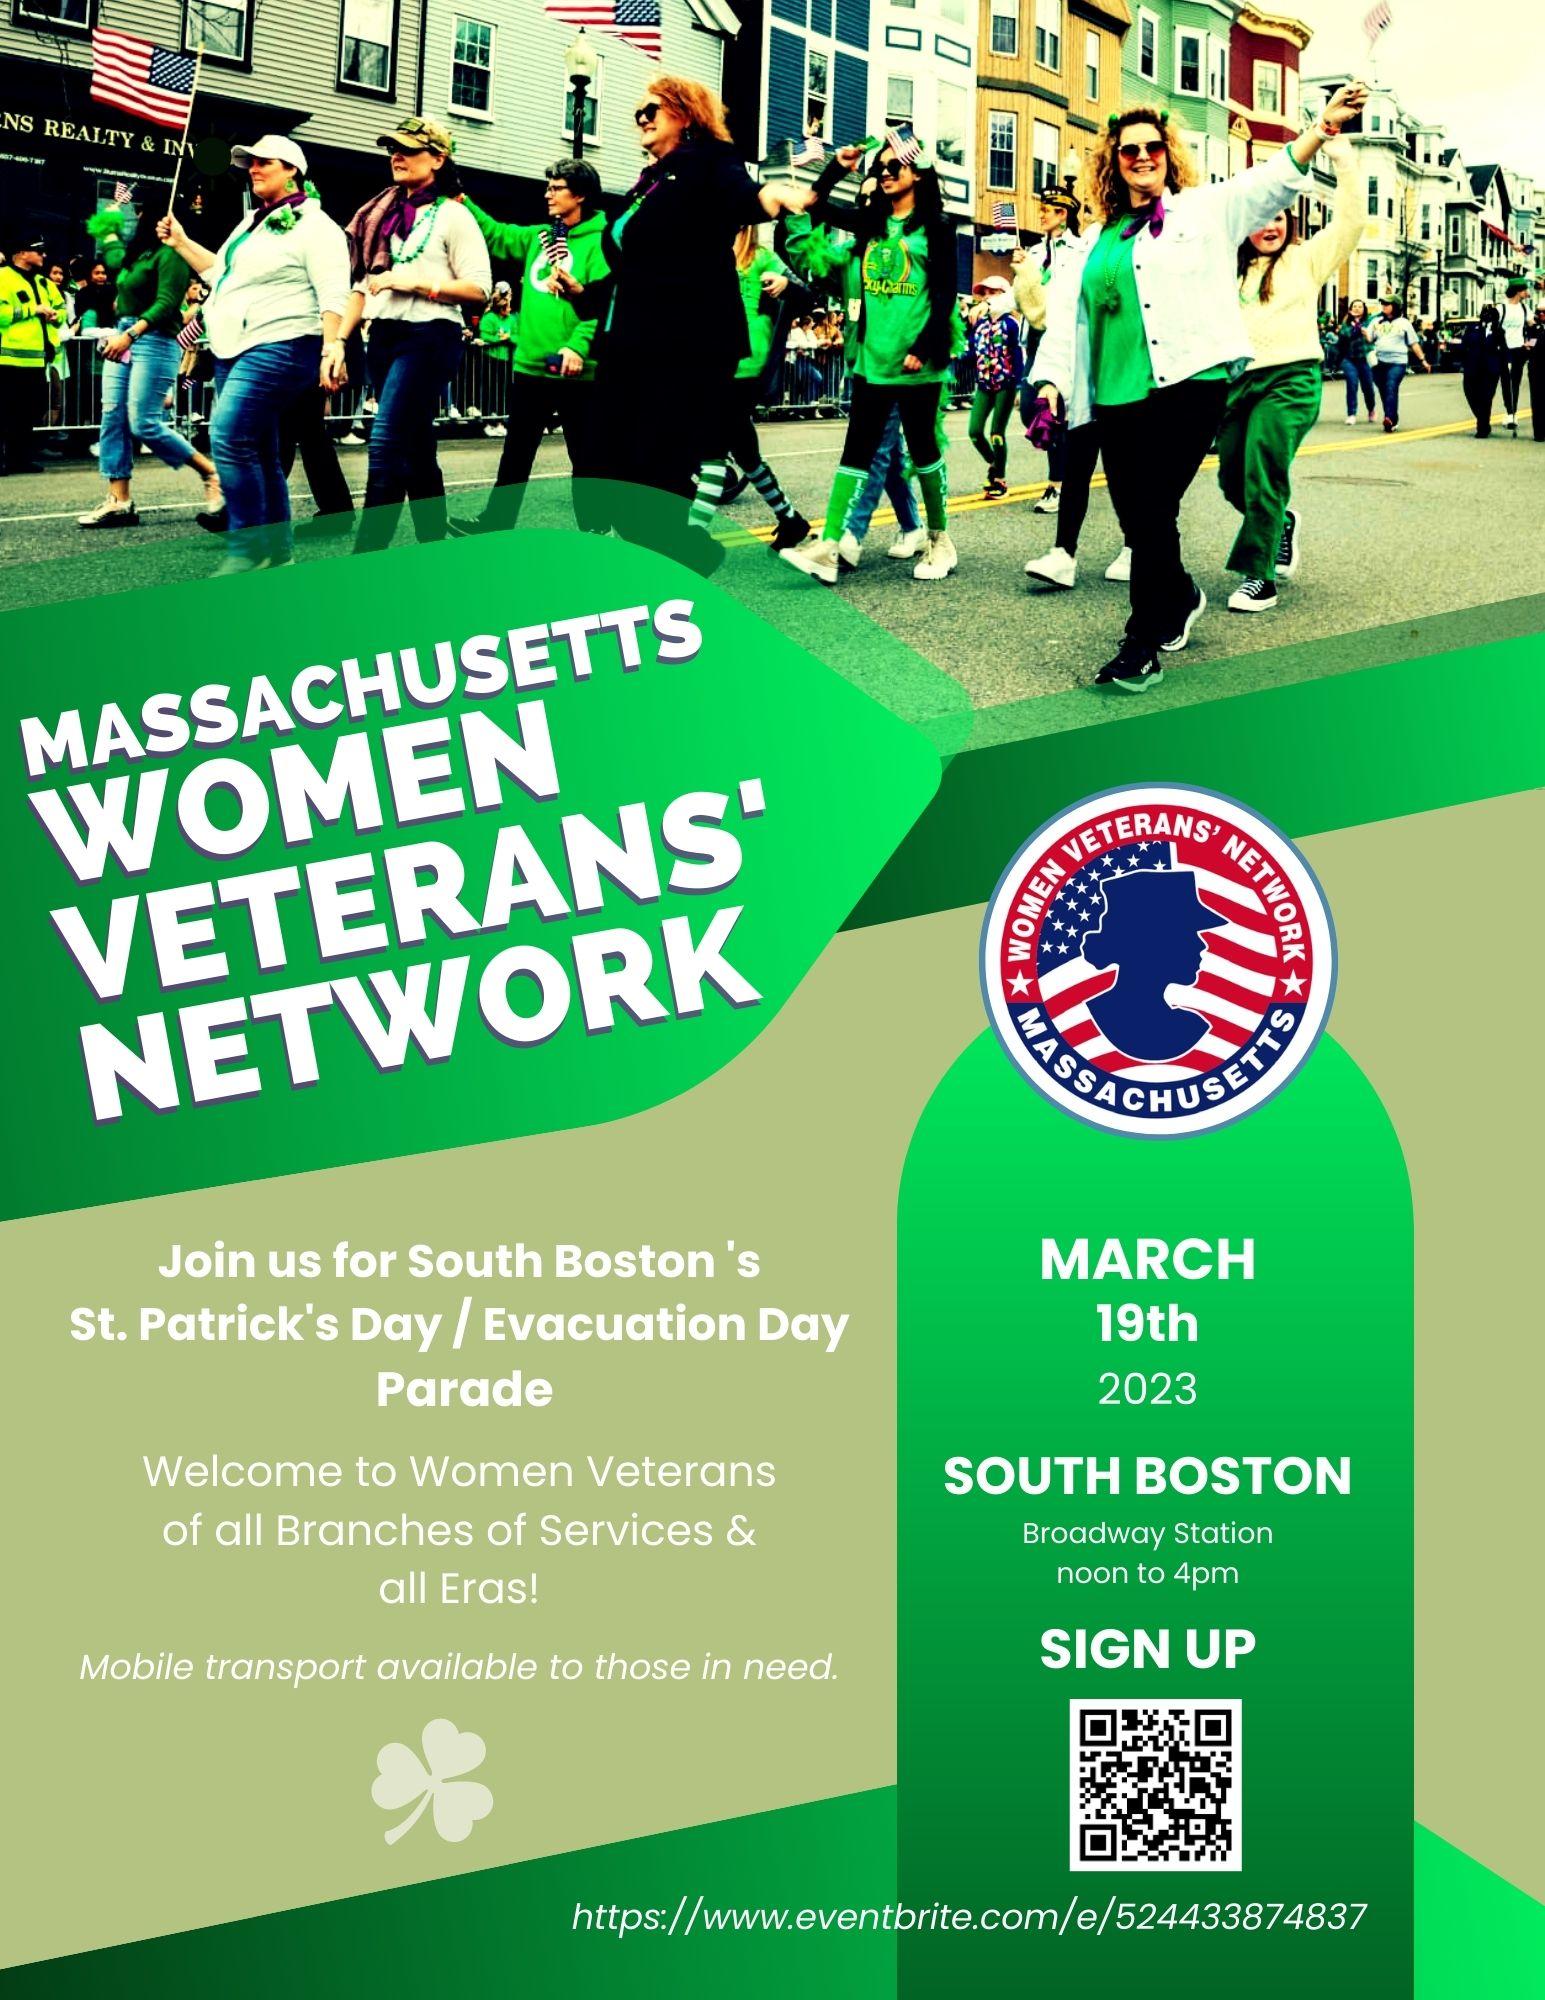 Flier inviting women veterans to register and walk in the South Boston St. Patrick's Day Parade on March 19th, 2023.